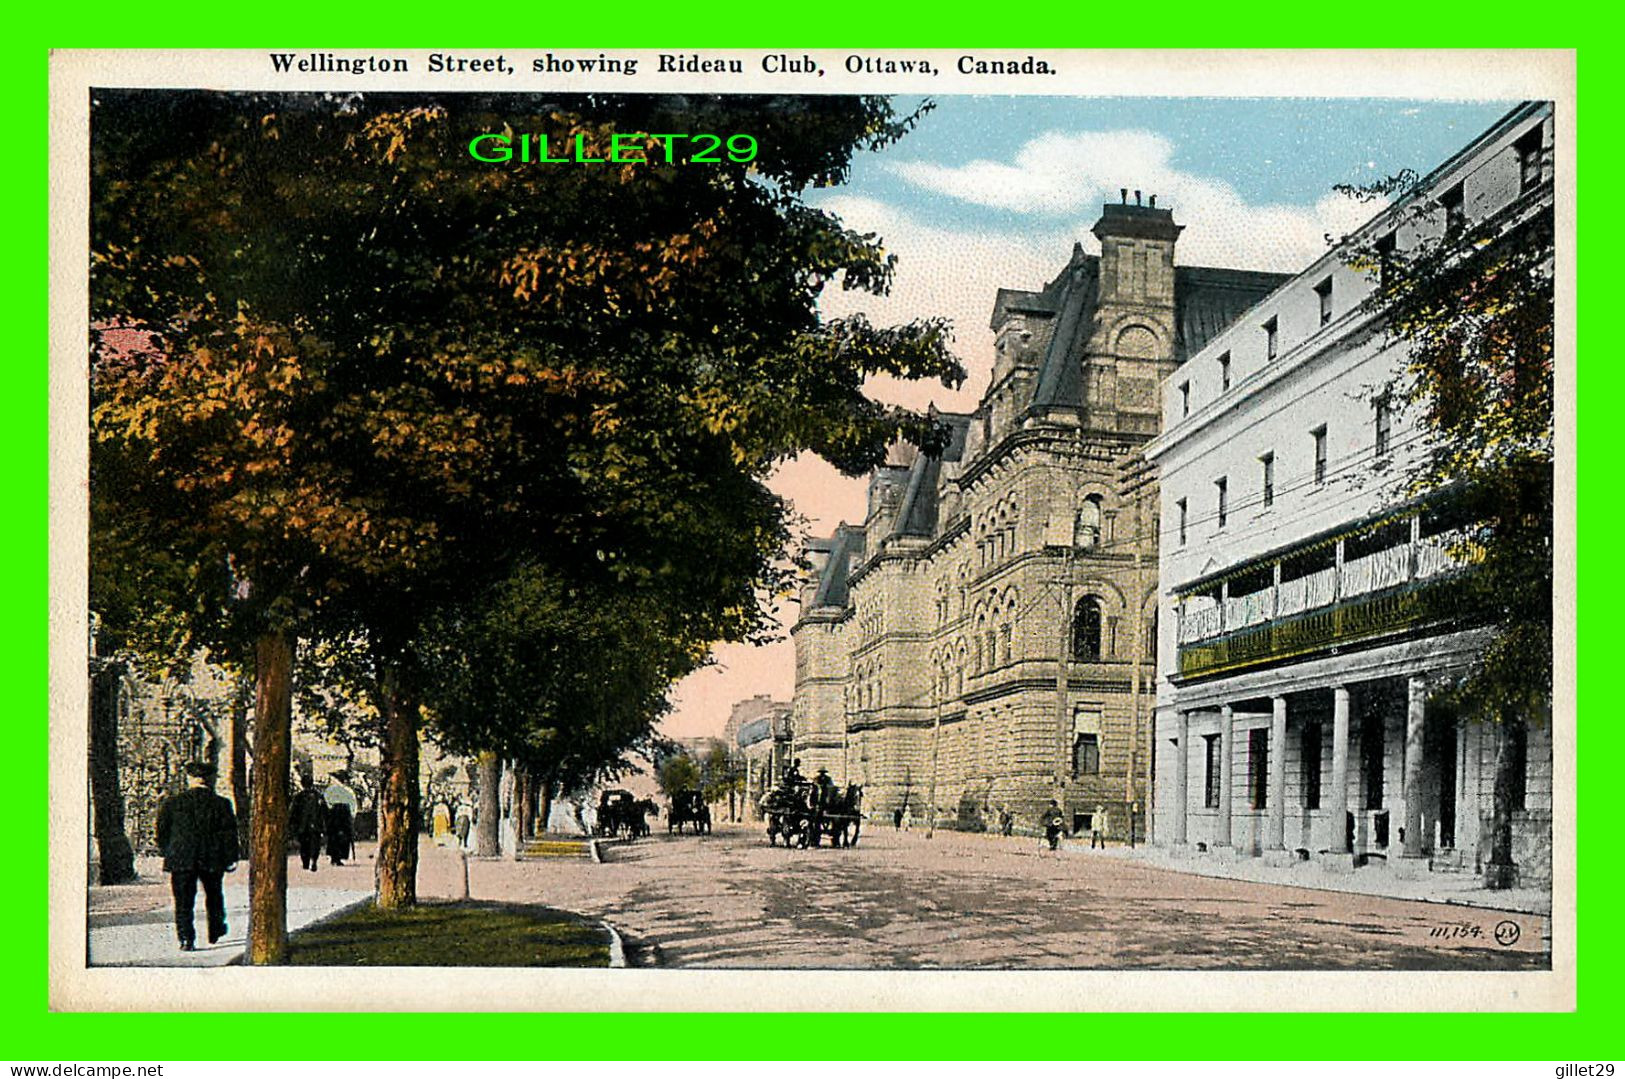 OTTAWA, ONTARIO - WELLINGTON STREET, SHOWING RIDEAU CLUB - ANIMATED WITH PEOPLES - THE VALENTINE & SONS UNITED - - Ottawa